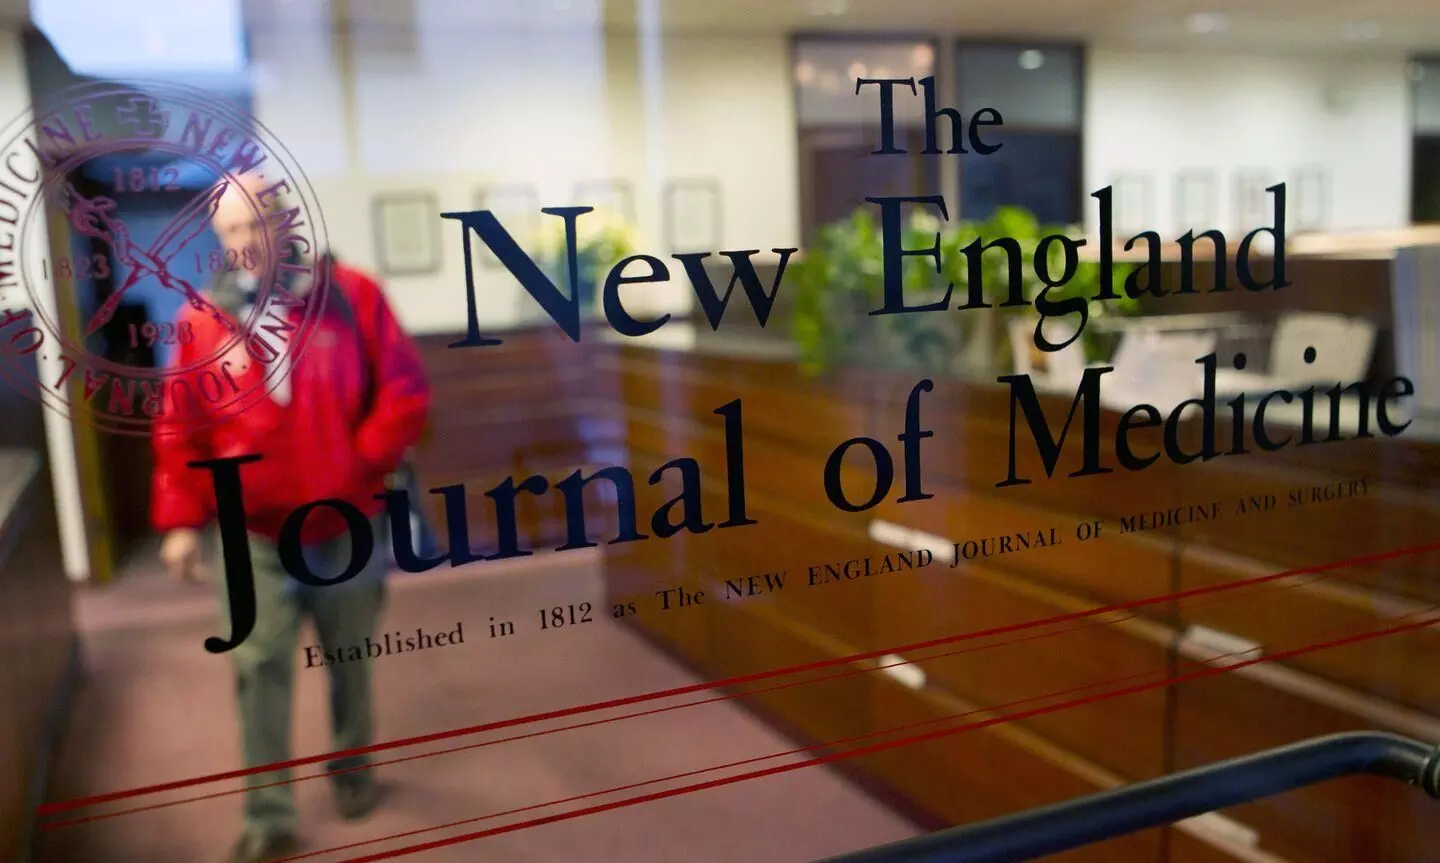 We Couldnt Even Provide PPE Kits: The New England Journal of Medicine Condemns Trump